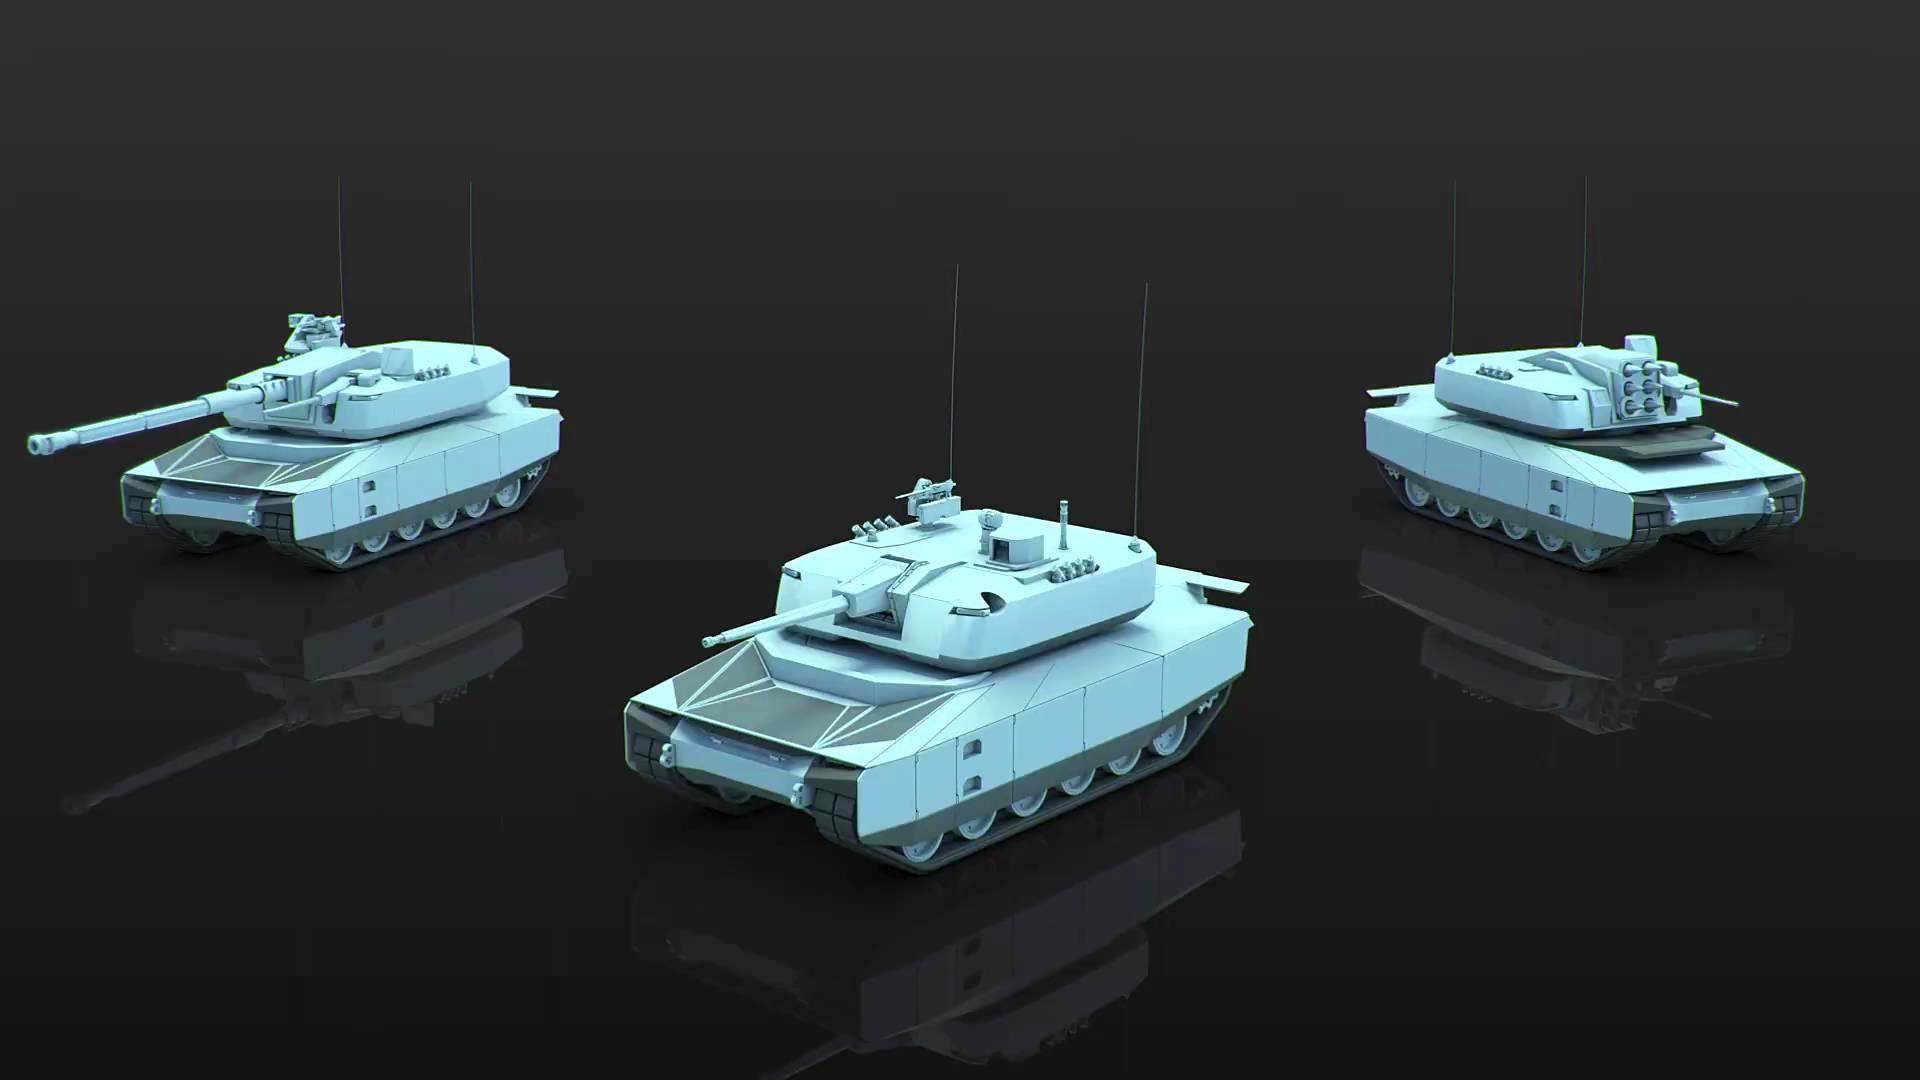 
The Main Ground Combat System will consist not just of one armoured fighting vehicle but a system of manned and unmanned vehicles. Image: French Ministry of Defence